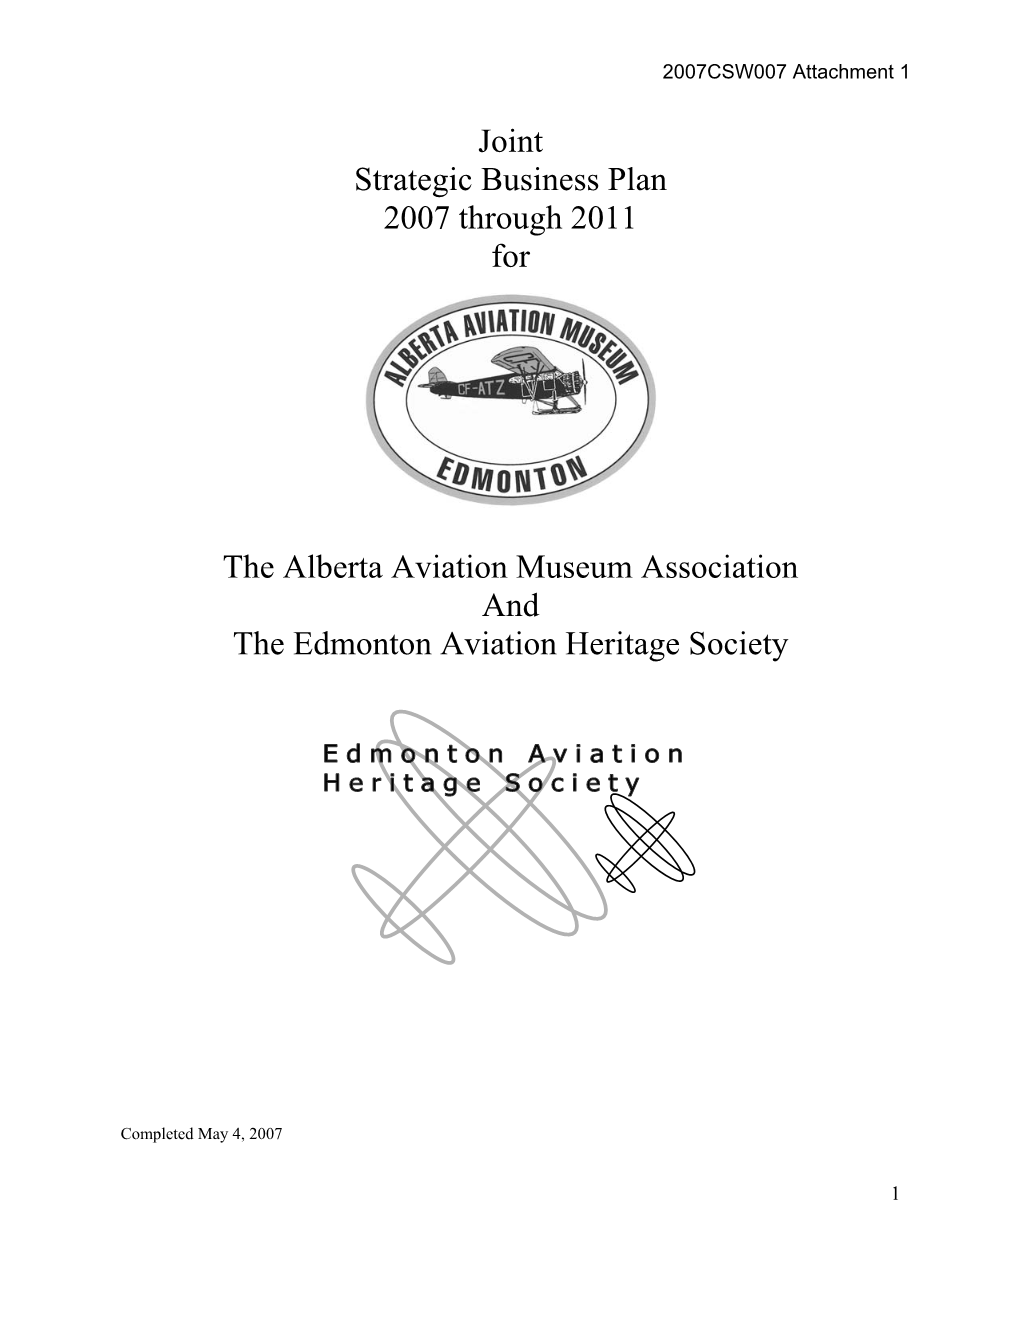 Joint Strategic Business Plan 2007 Through 2011 for the Alberta Aviation Museum Association and the Edmonton Aviation Heritage S